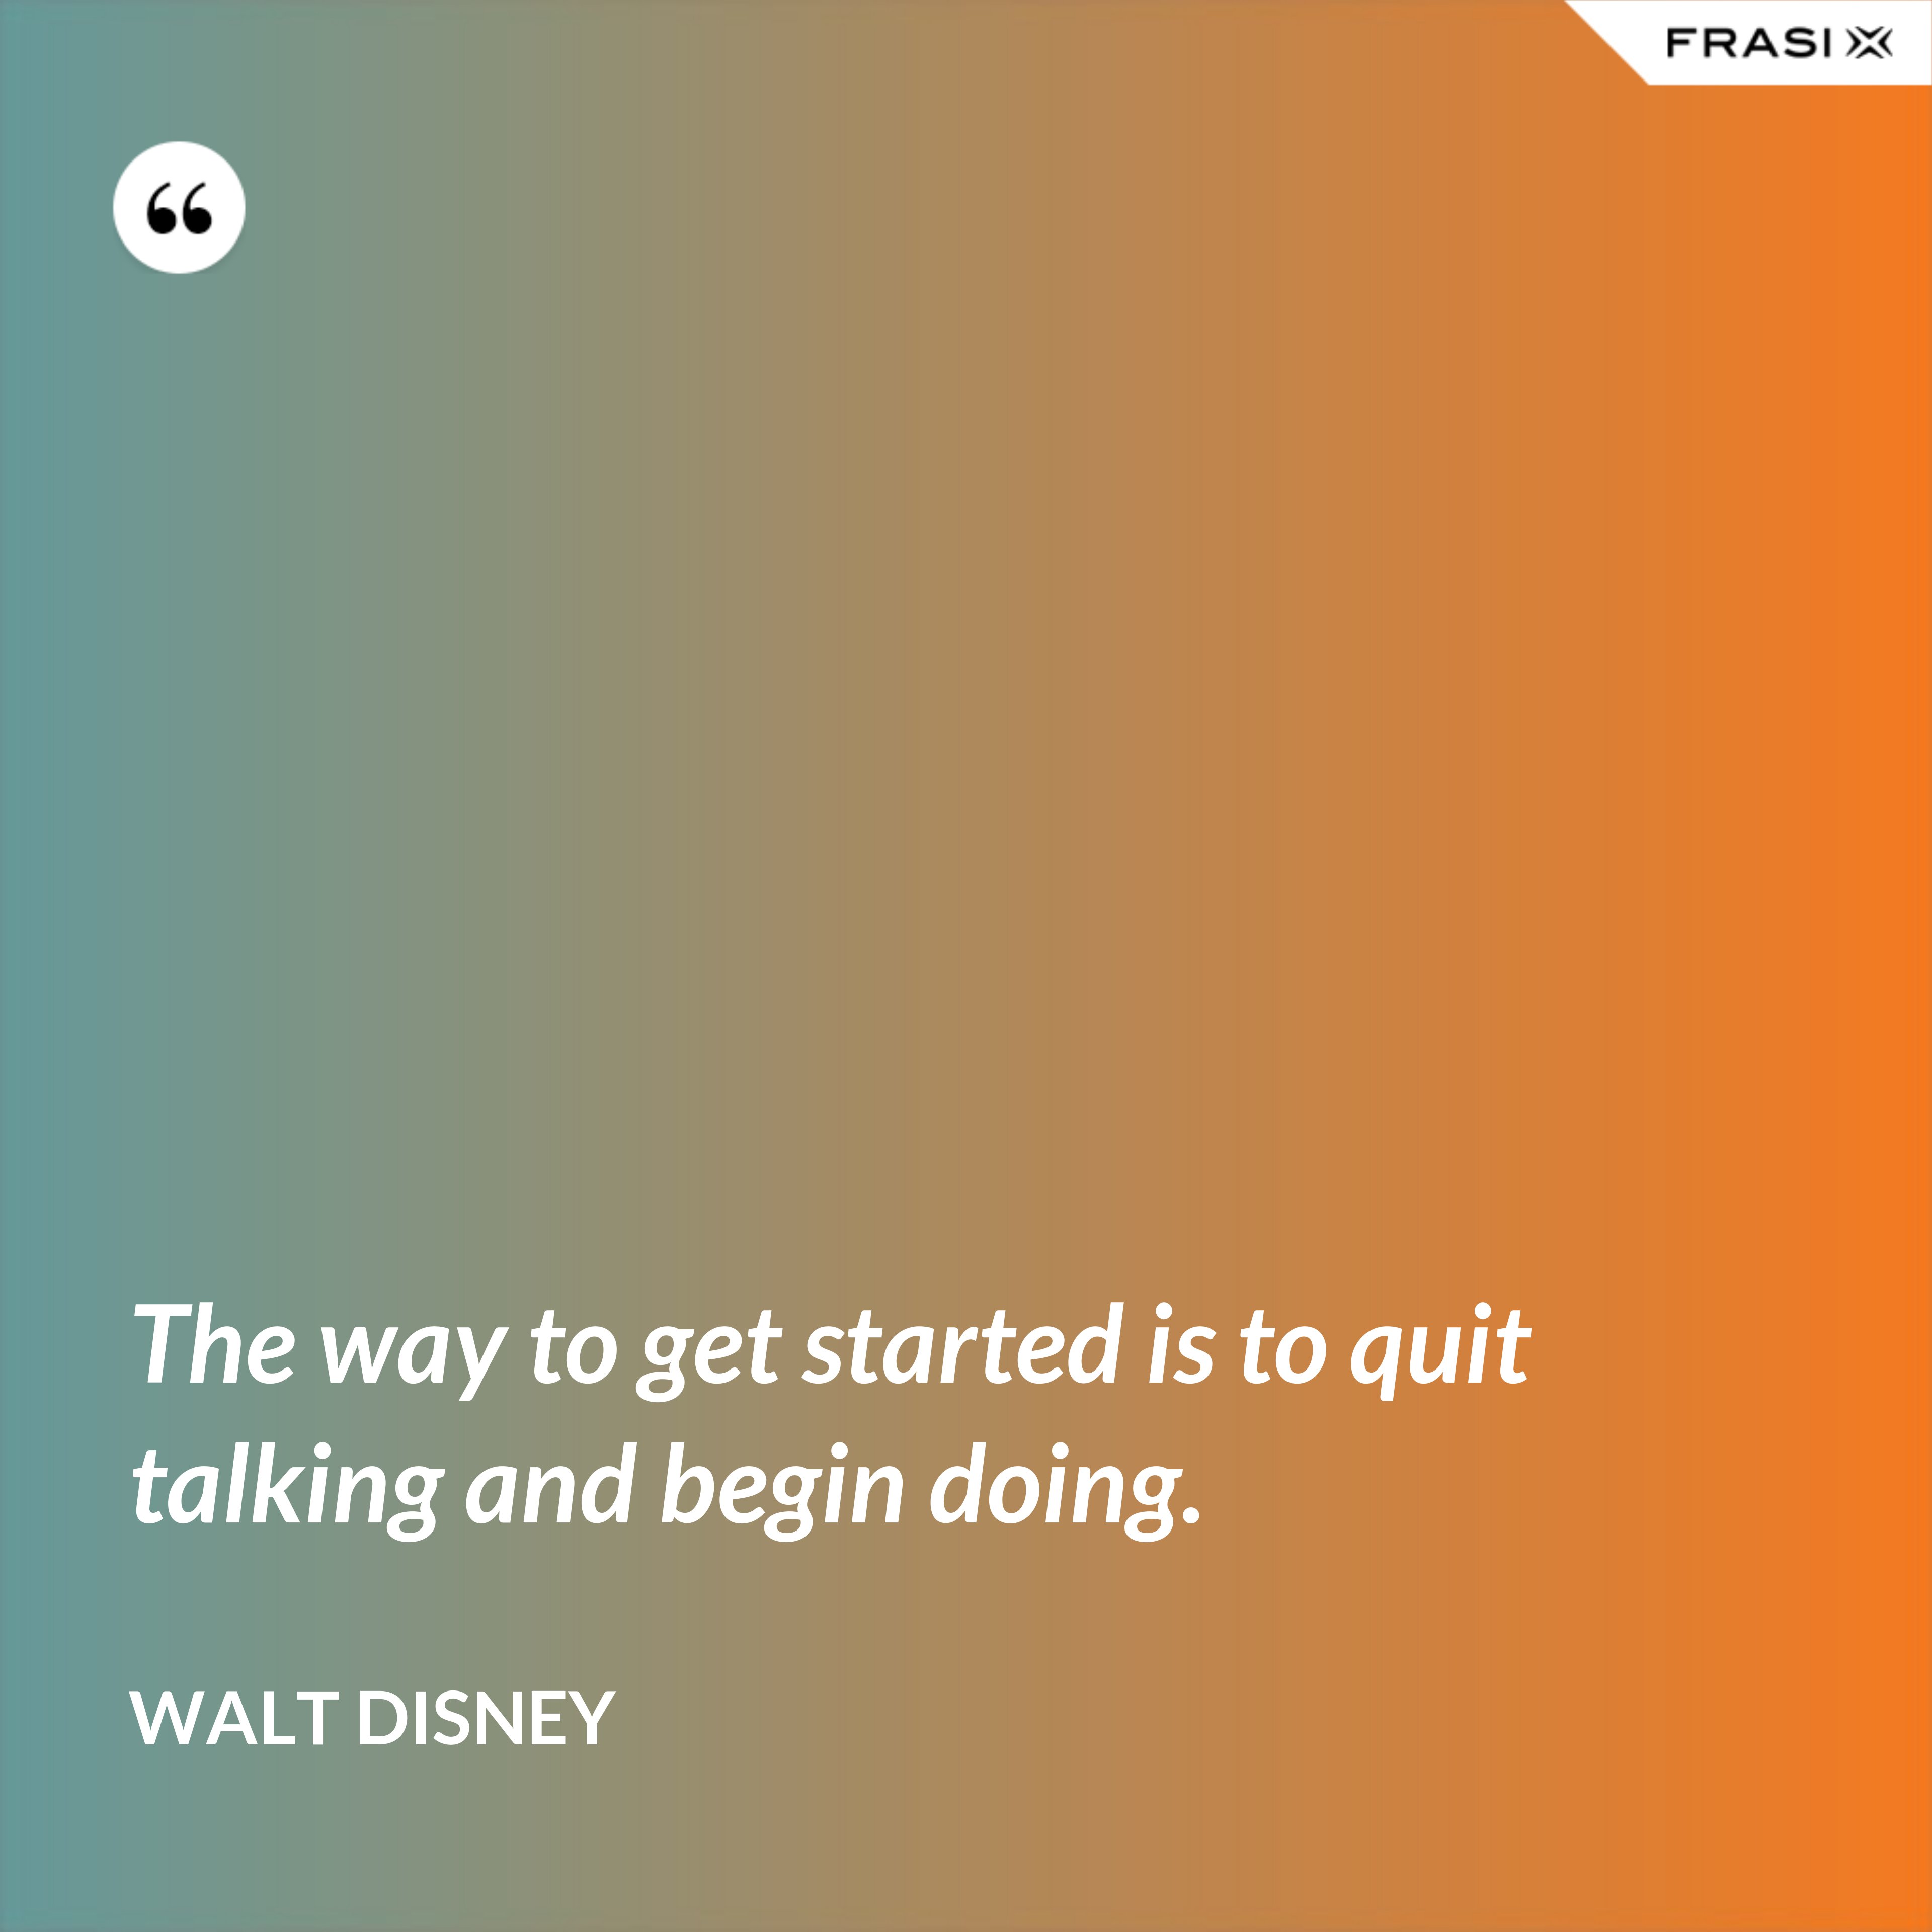 The way to get started is to quit talking and begin doing. - Walt Disney